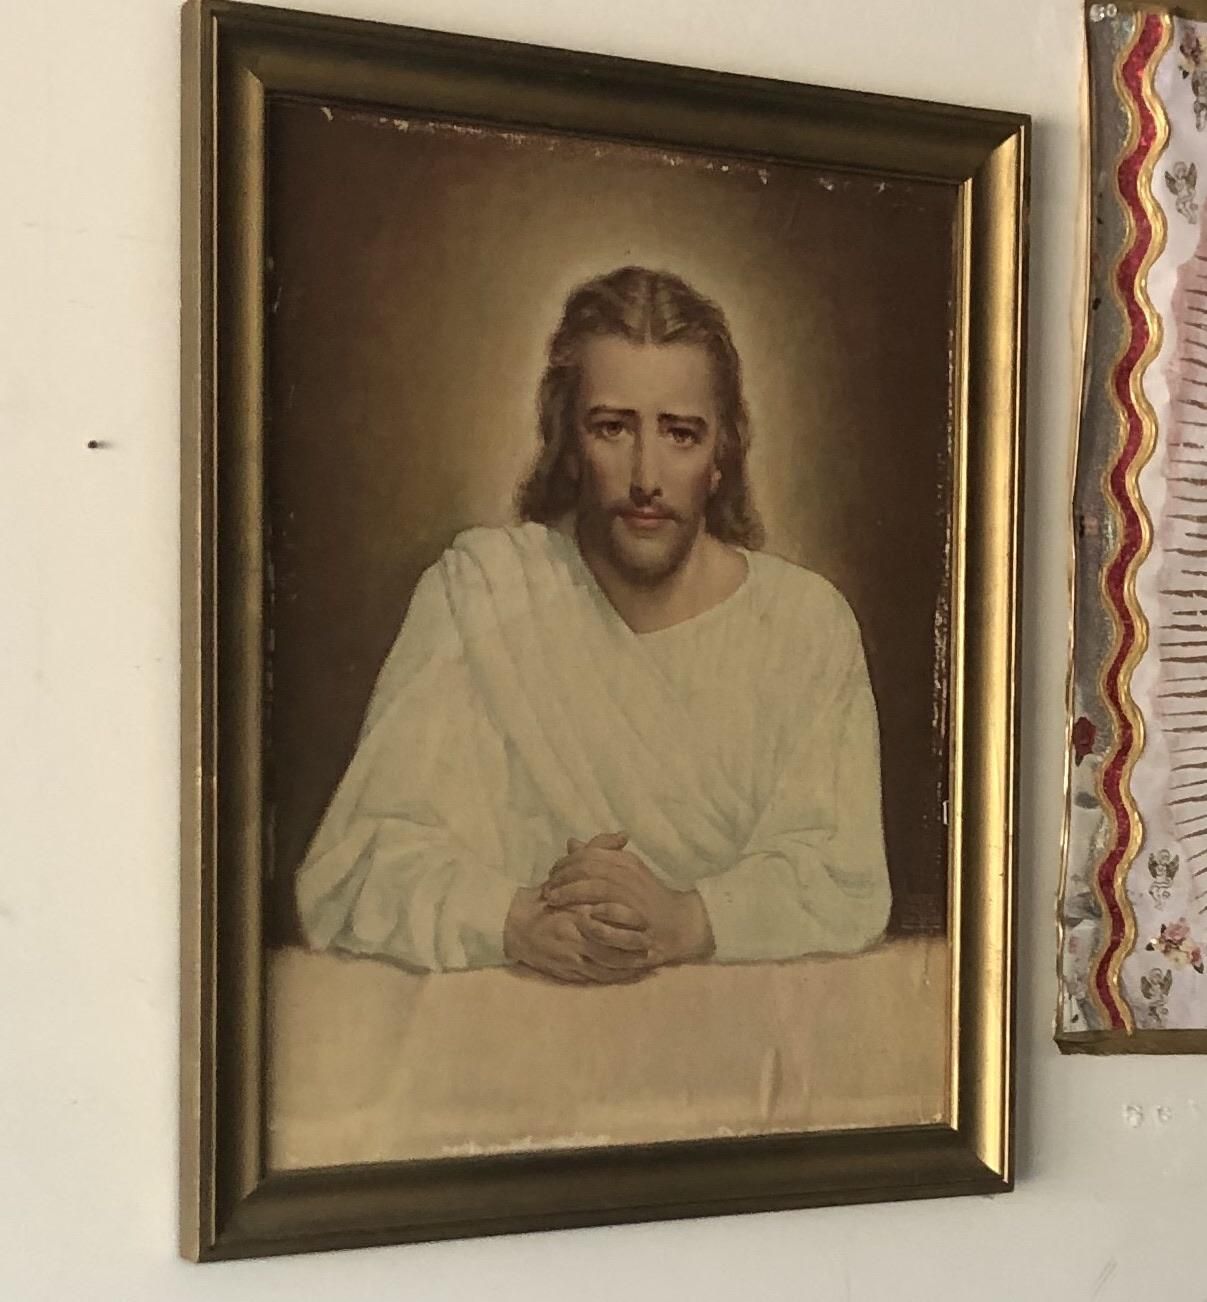 The “I’m not mad, I’m just disappointed” Jesus